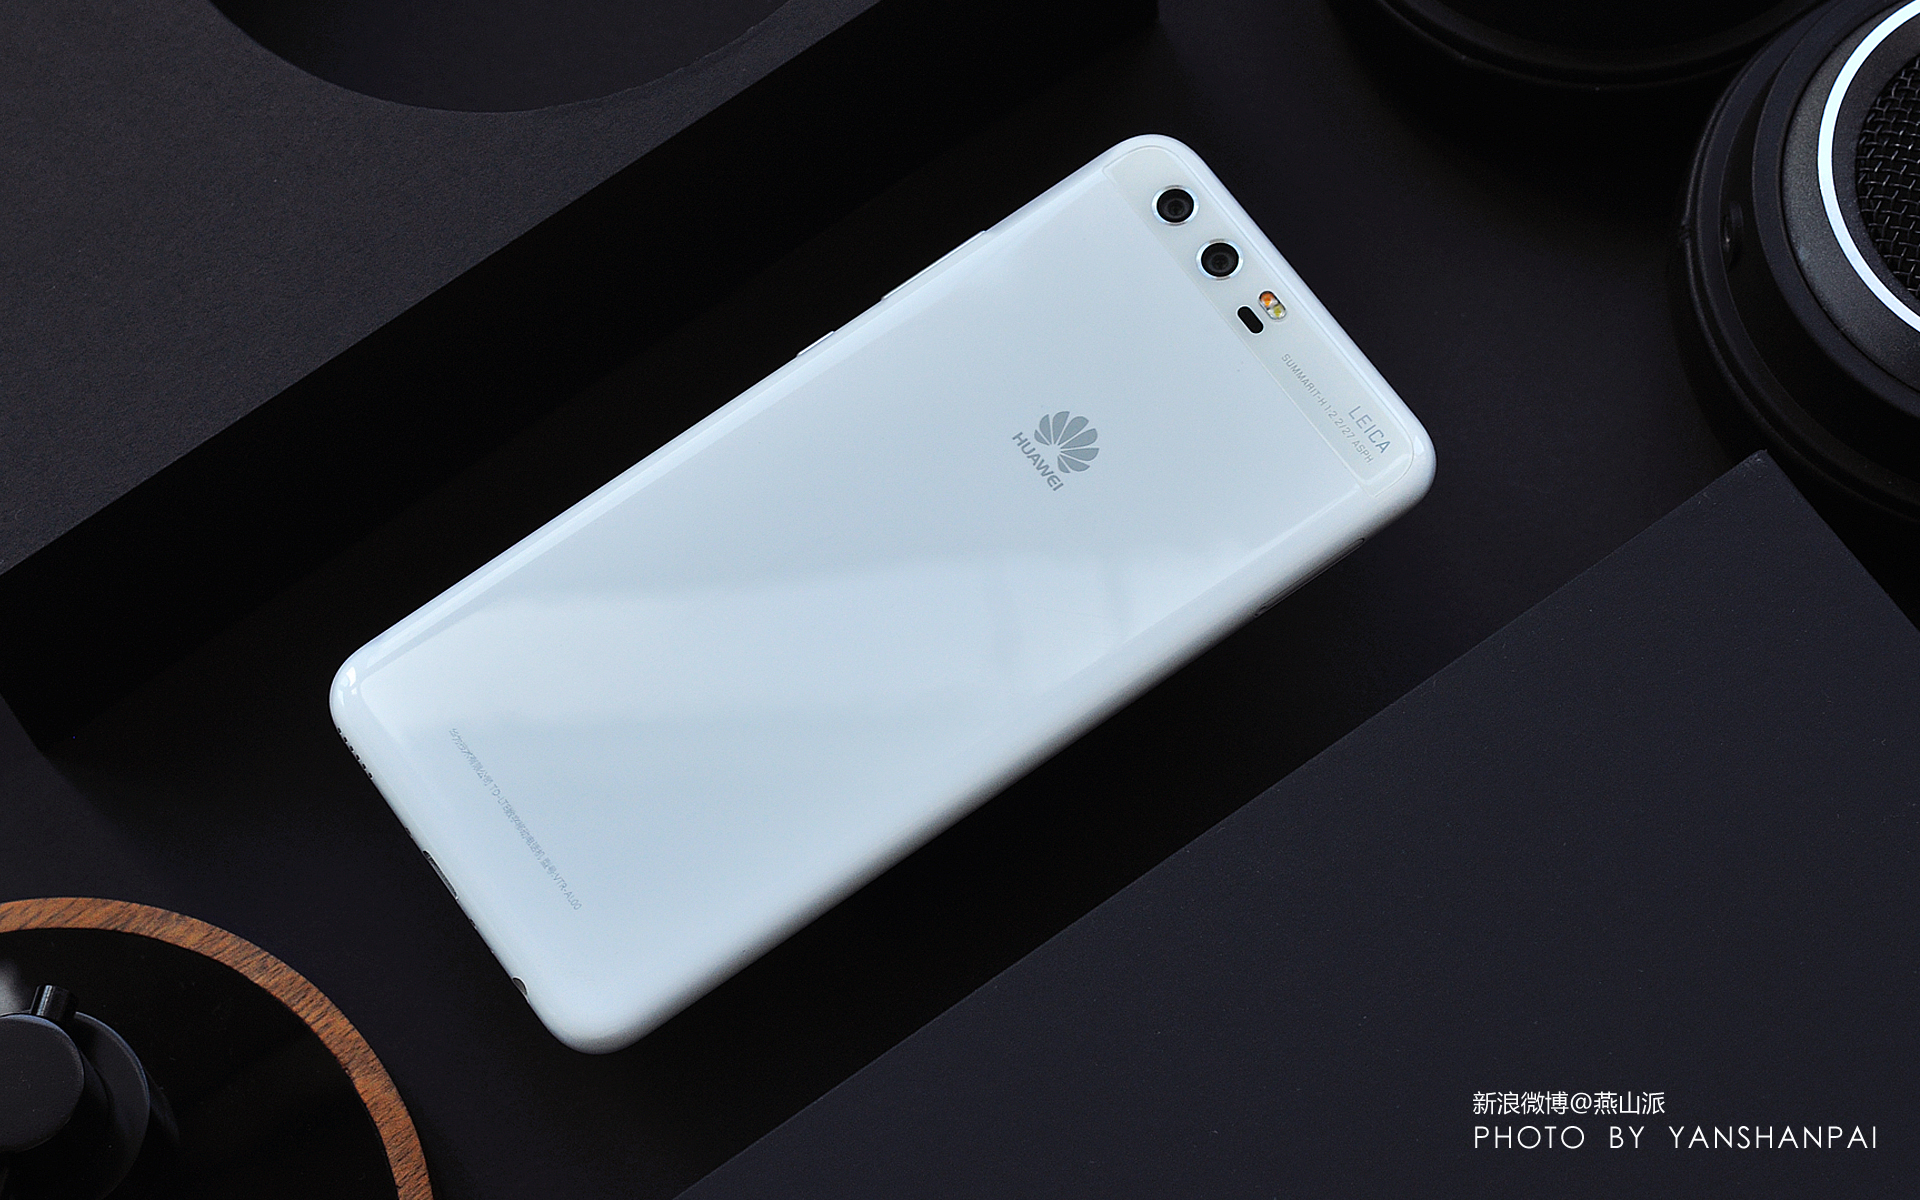 Huawei P10 and P10 Plus Announced: Here Are the Specs, Pricing and ...